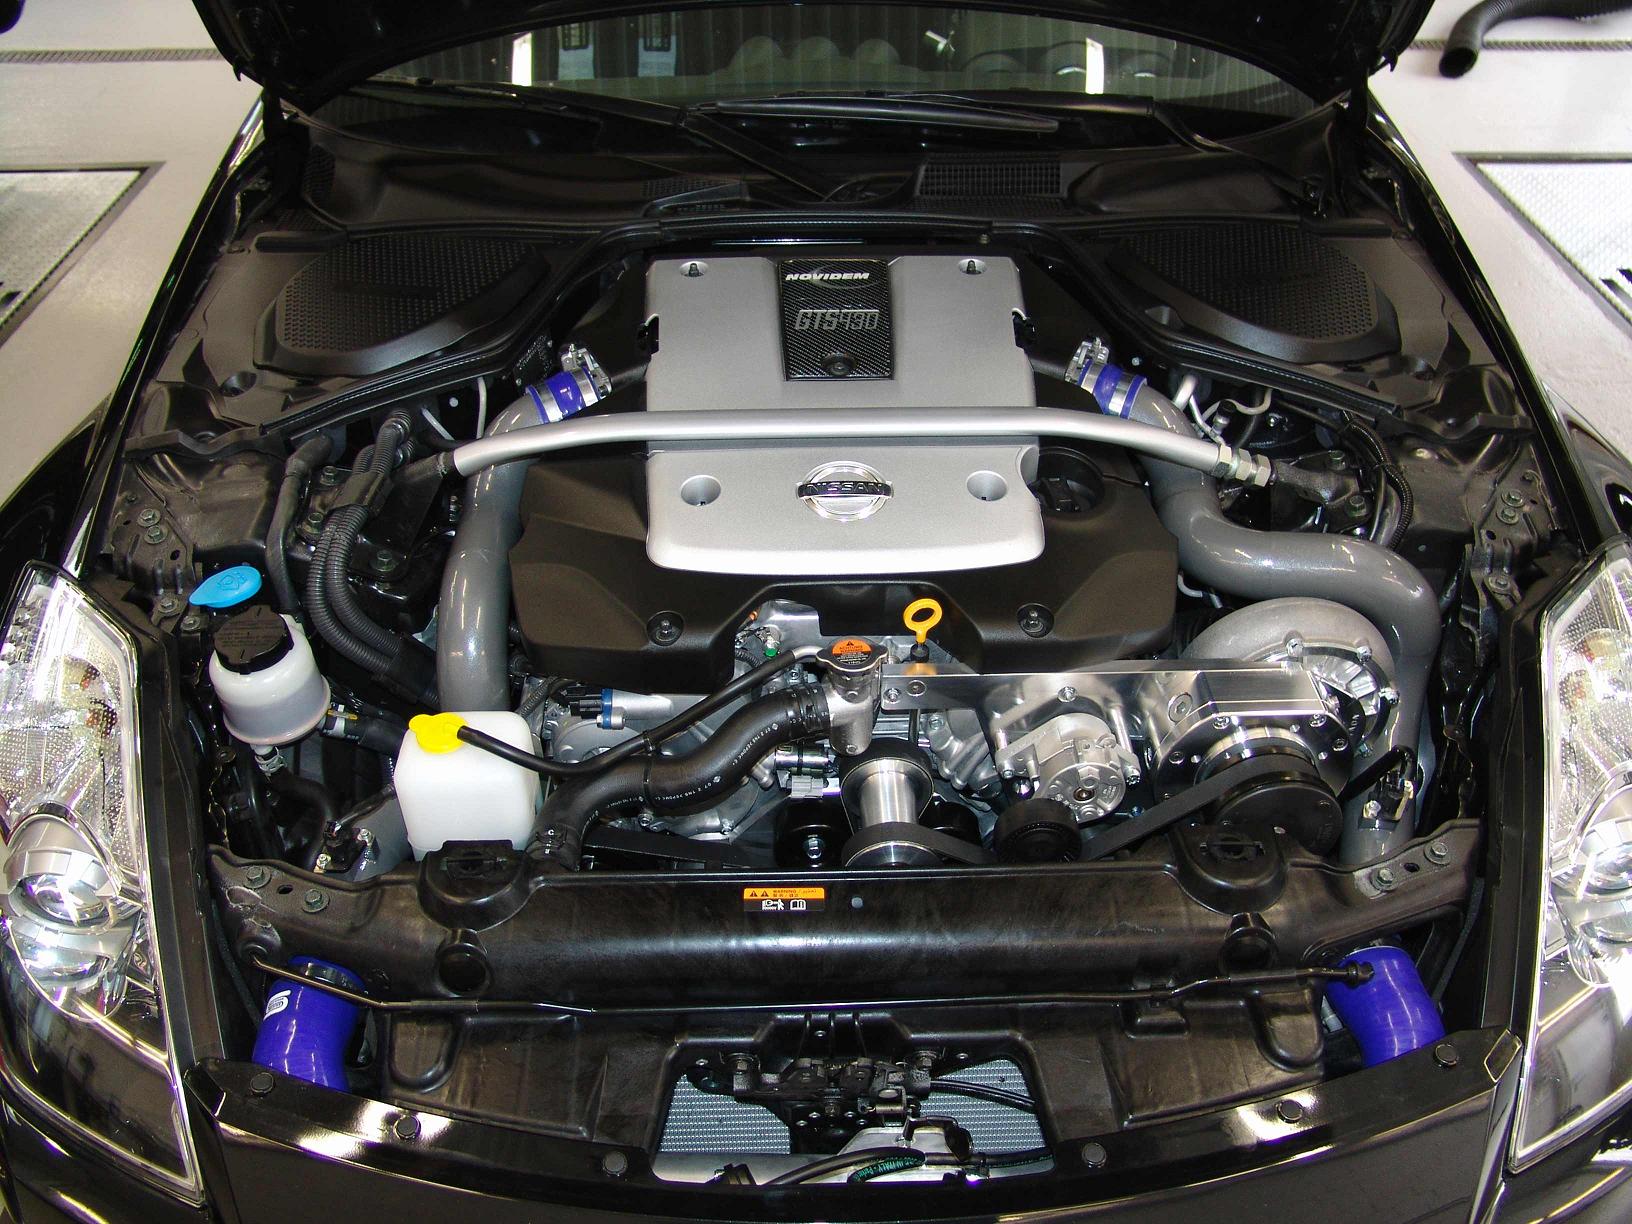 Supercharger Kit For Hr Page 2 My350z Com Nissan 350z And 370z Forum Discussion